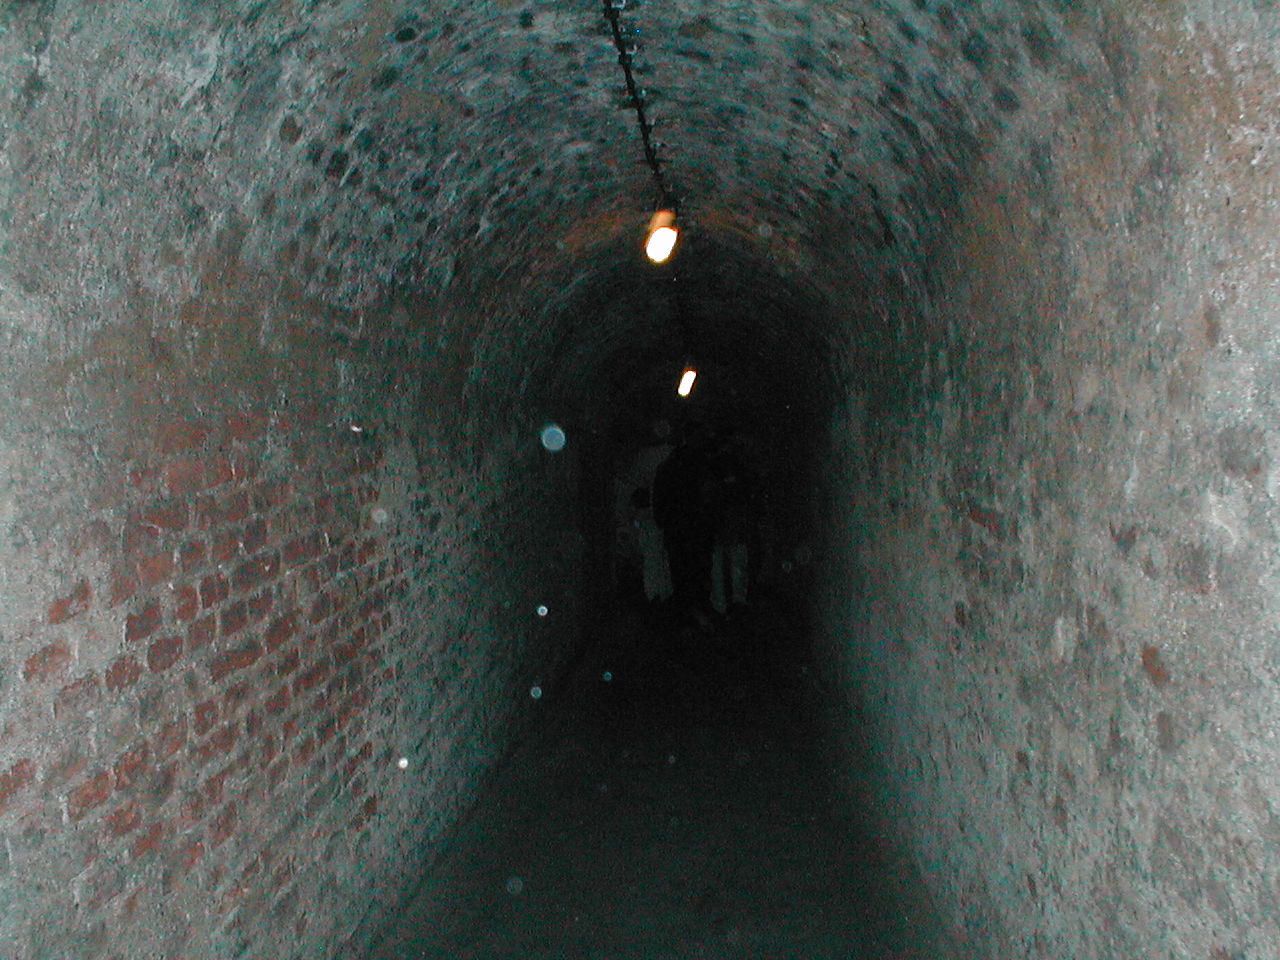 More Catacombs